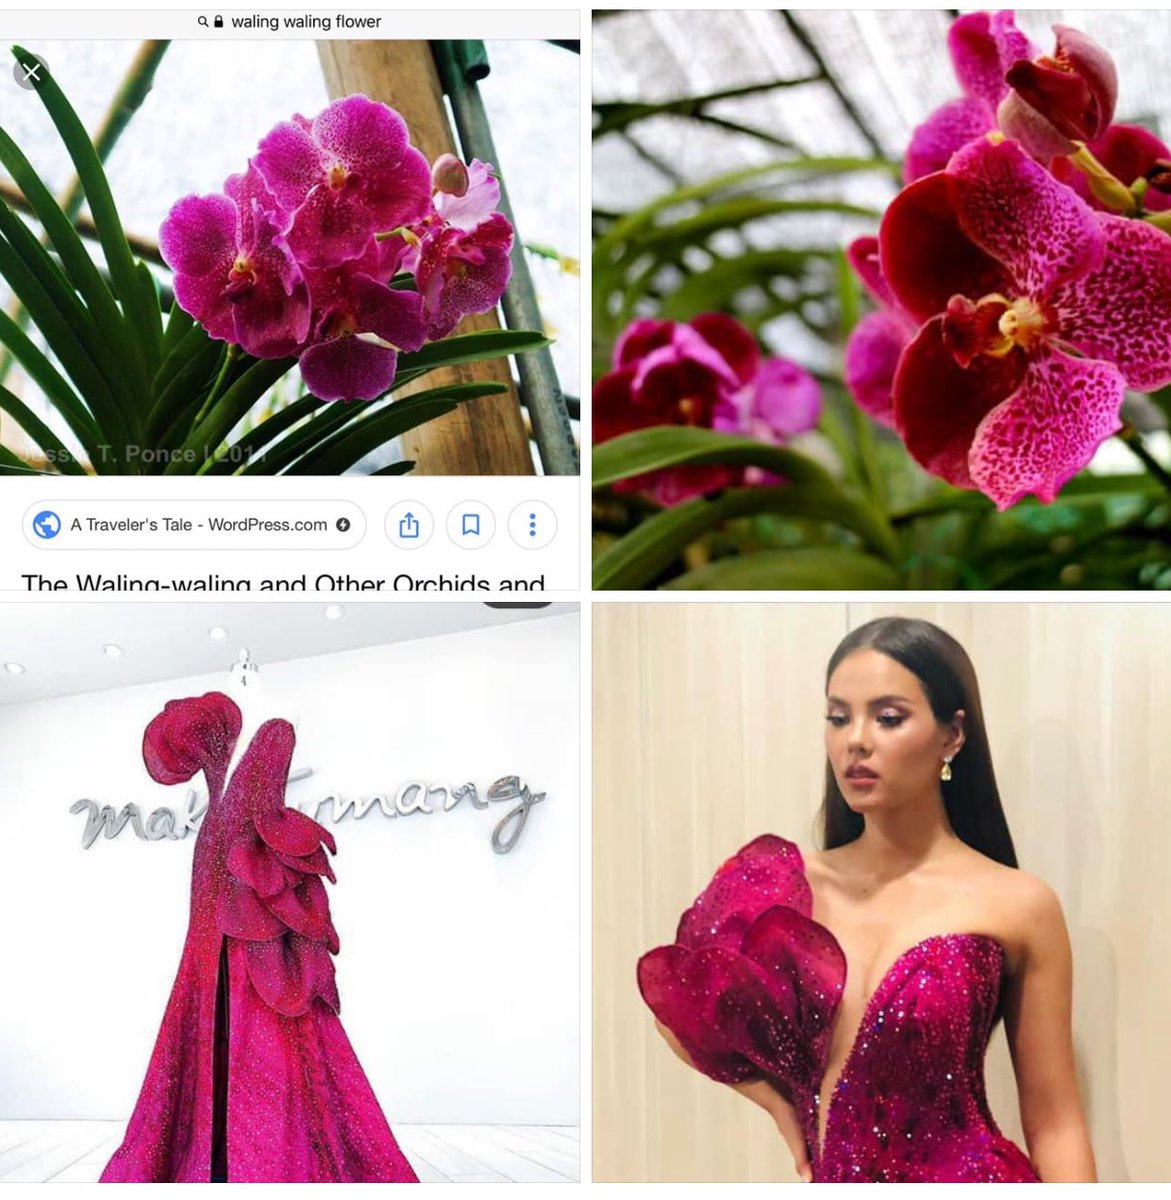 So this is the Waling waling (Orchid) inspired gown of Catriona Gray. 🌺 #MissUniverse2018 #BbPilipinas2019